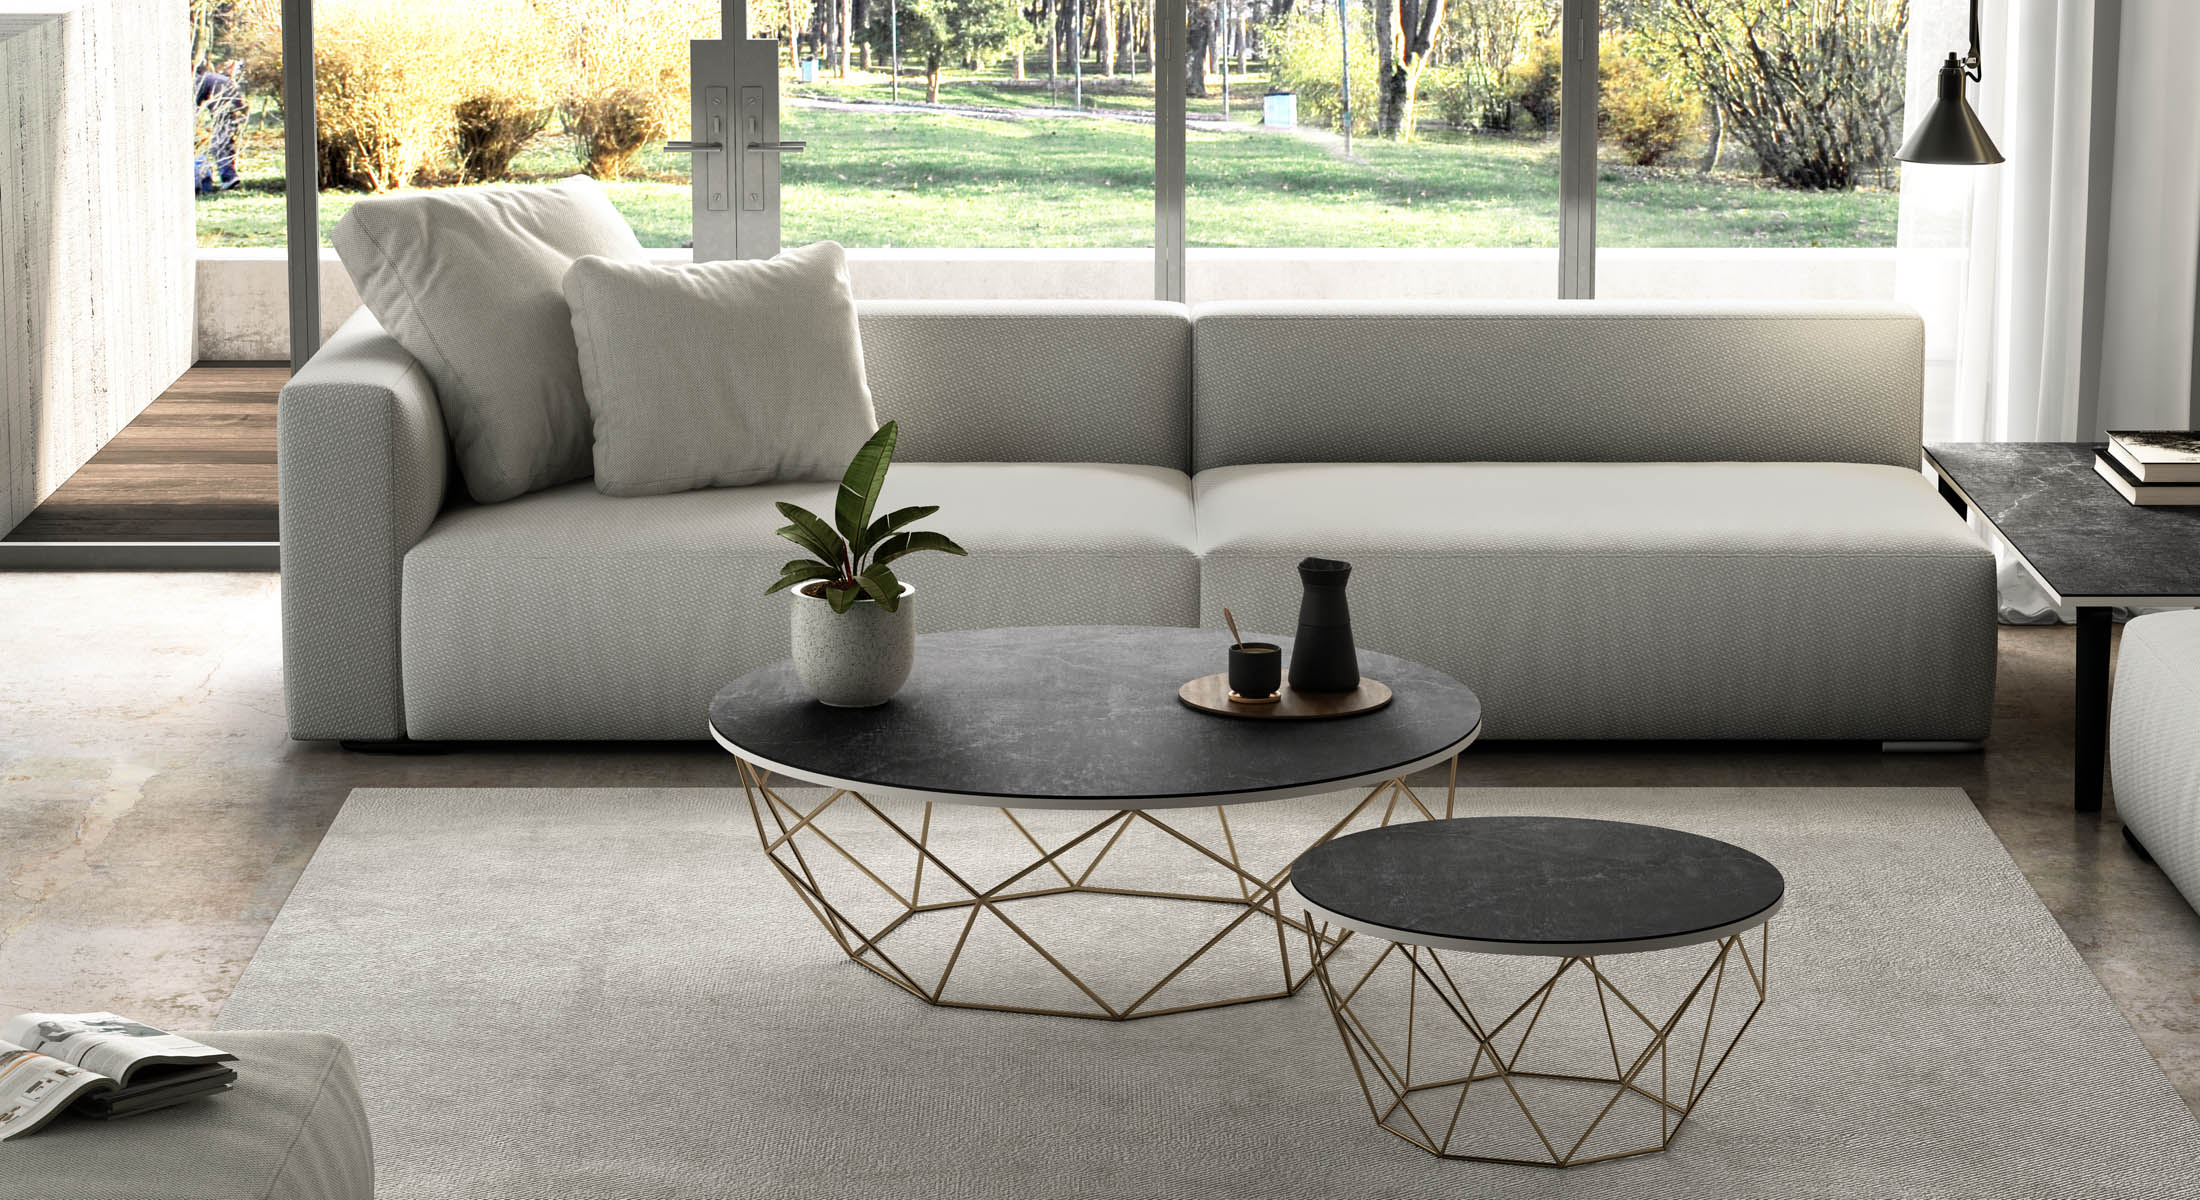 Image of 1 copia 1 in Styles and trends for your home - Cosentino